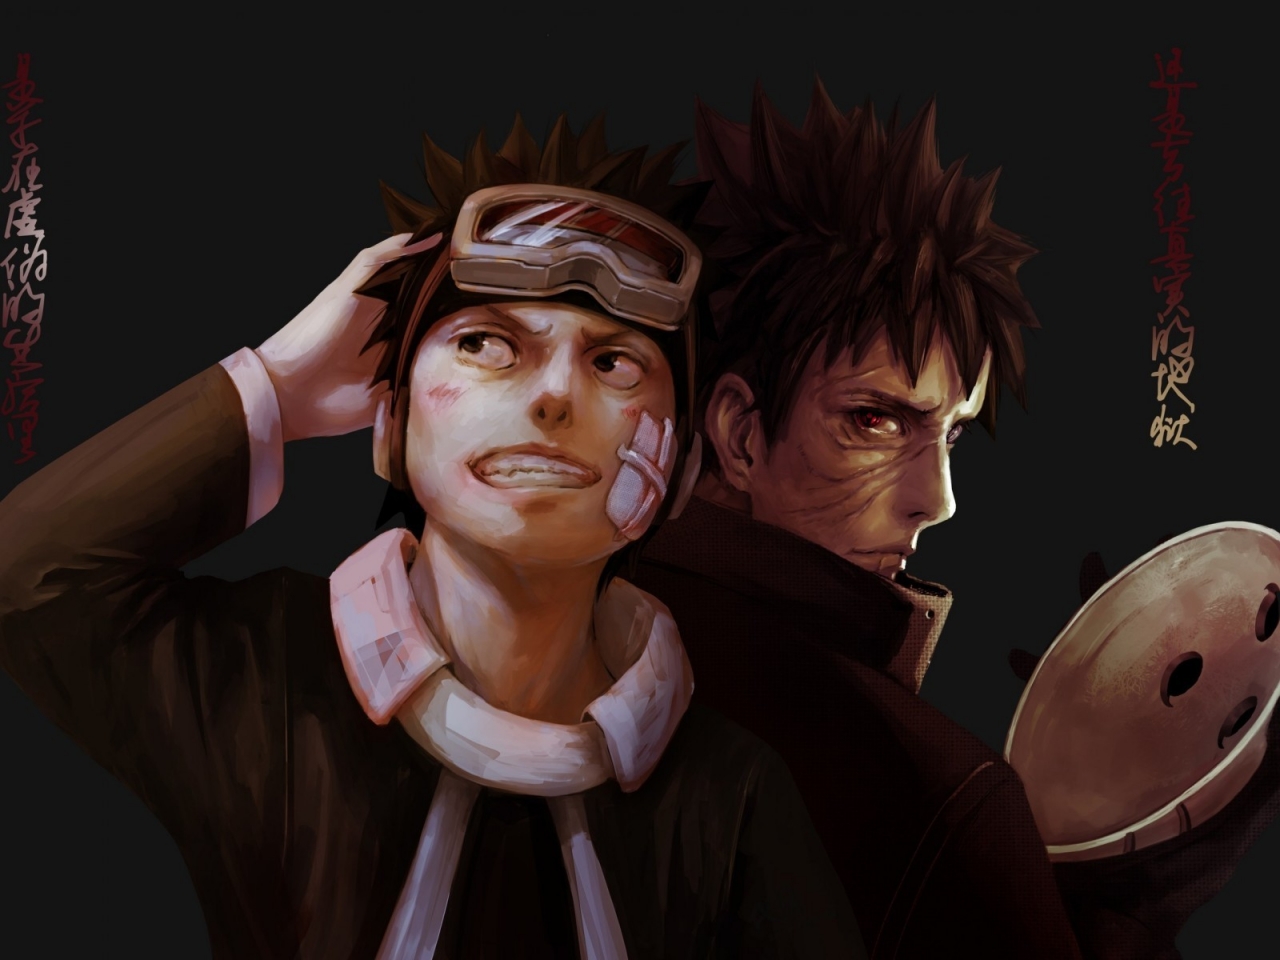 Naruto Style for 1280 x 960 resolution